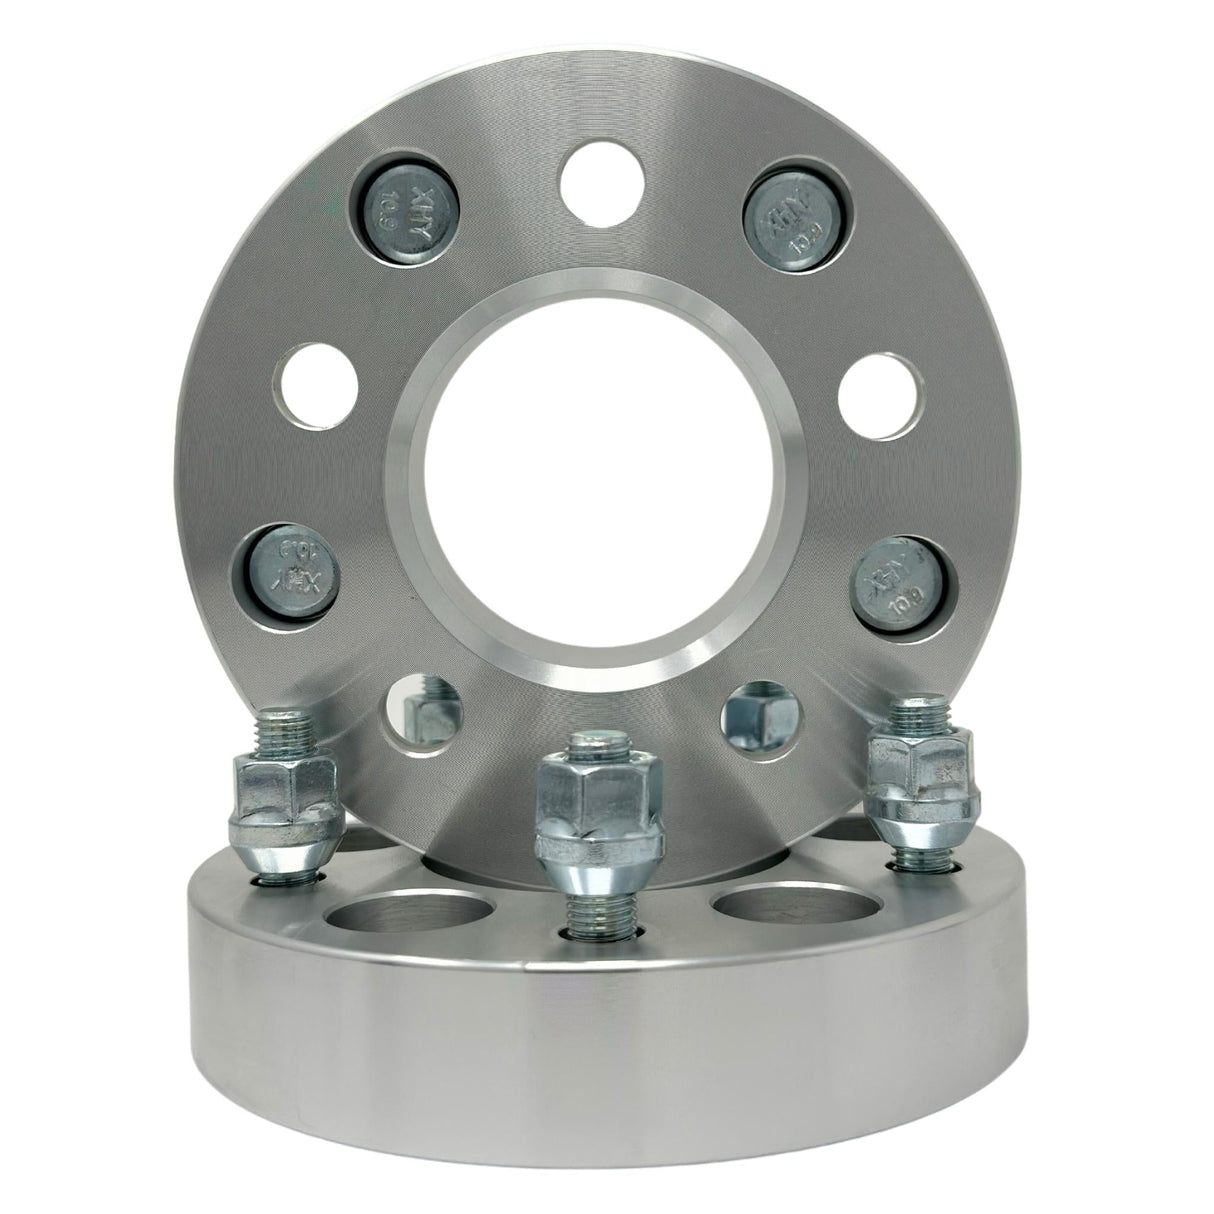 5x114.3 to 5x120 Wheel Adapters Hub Centric 14x1.5 Studs & Lug Nuts 70.5 Ford / Lincoln Center Bore For Mustang + More